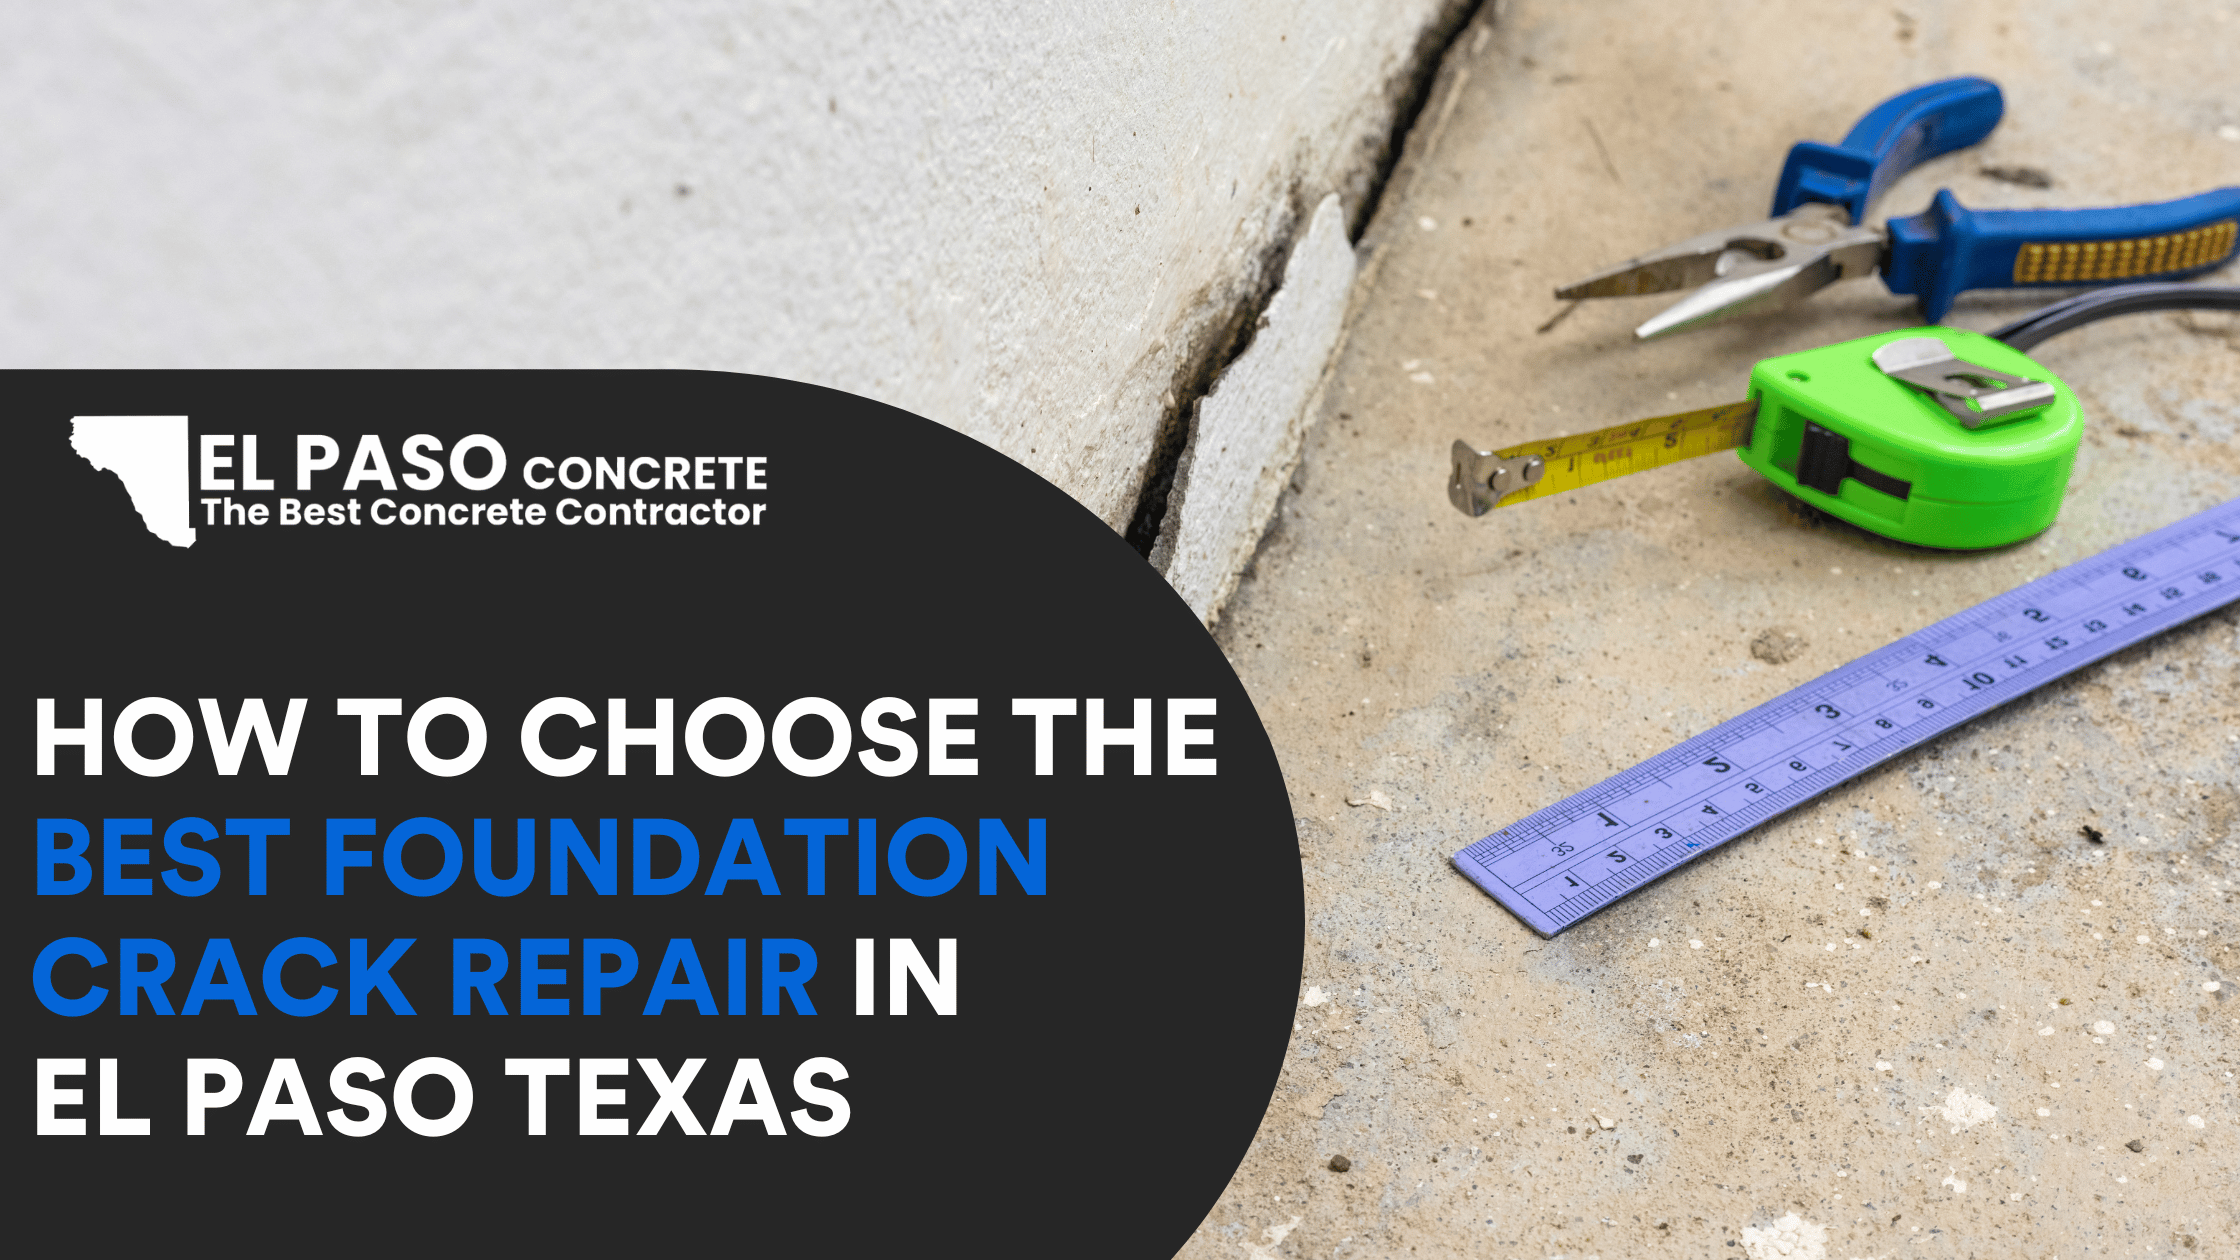 How to Choose the Best Foundation Crack Repair in El Paso Texas